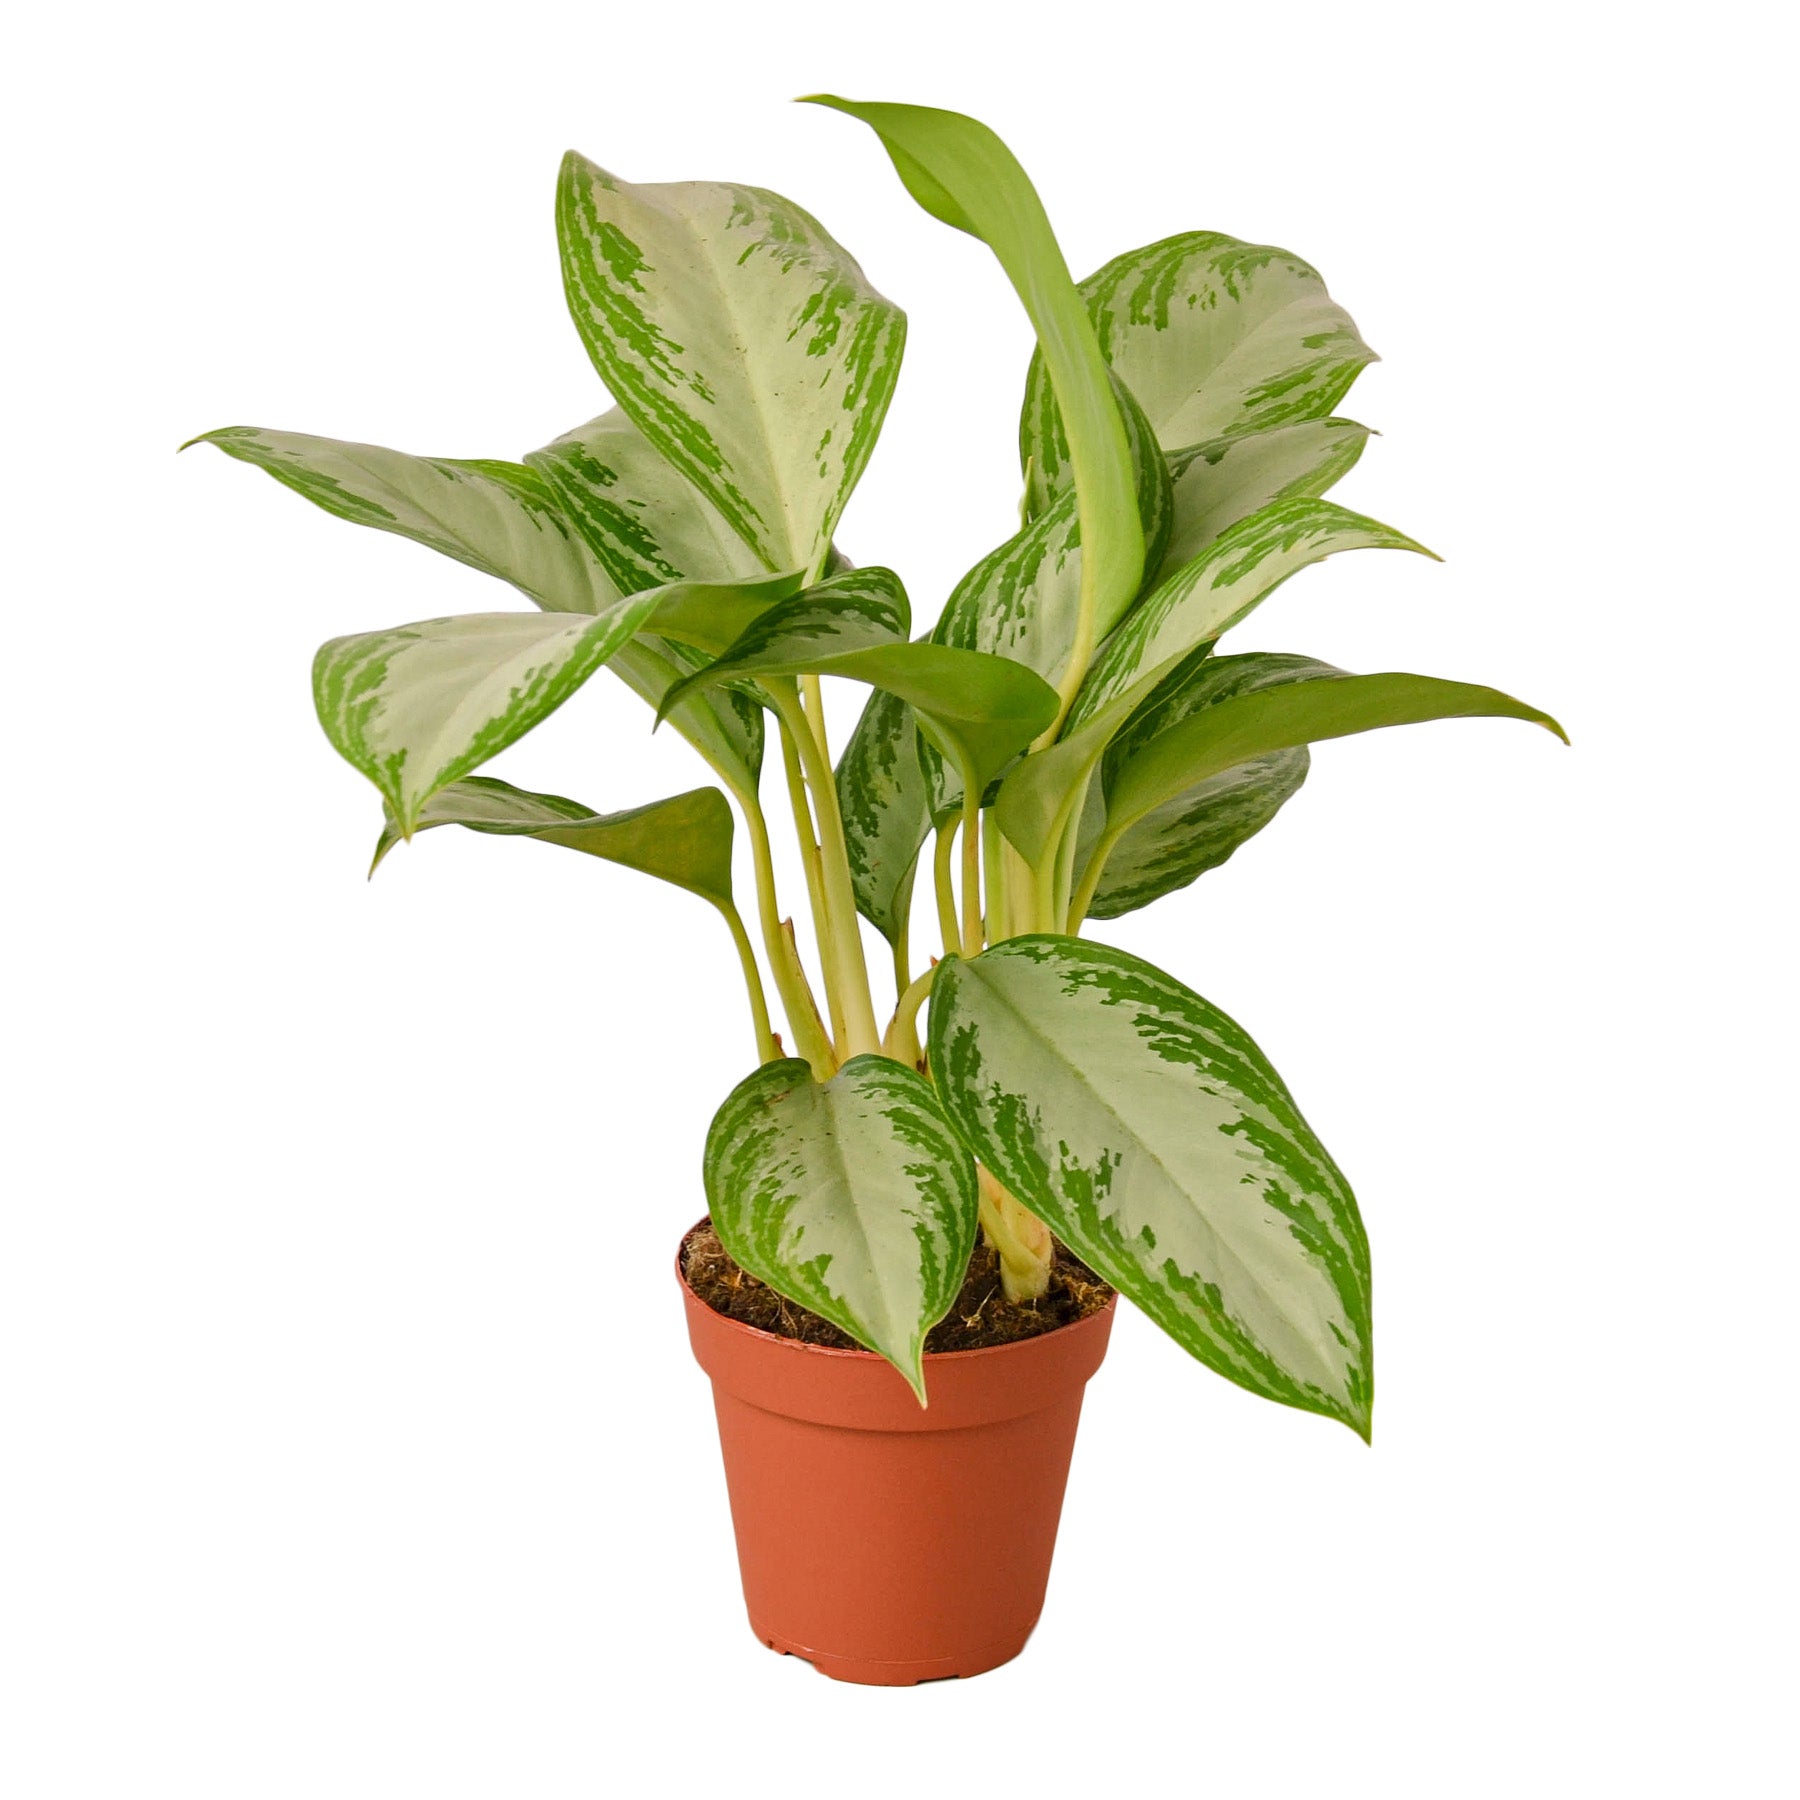 A plant in a pot on a white background, showcasing the beauty of a garden center's top-quality nursery selection.